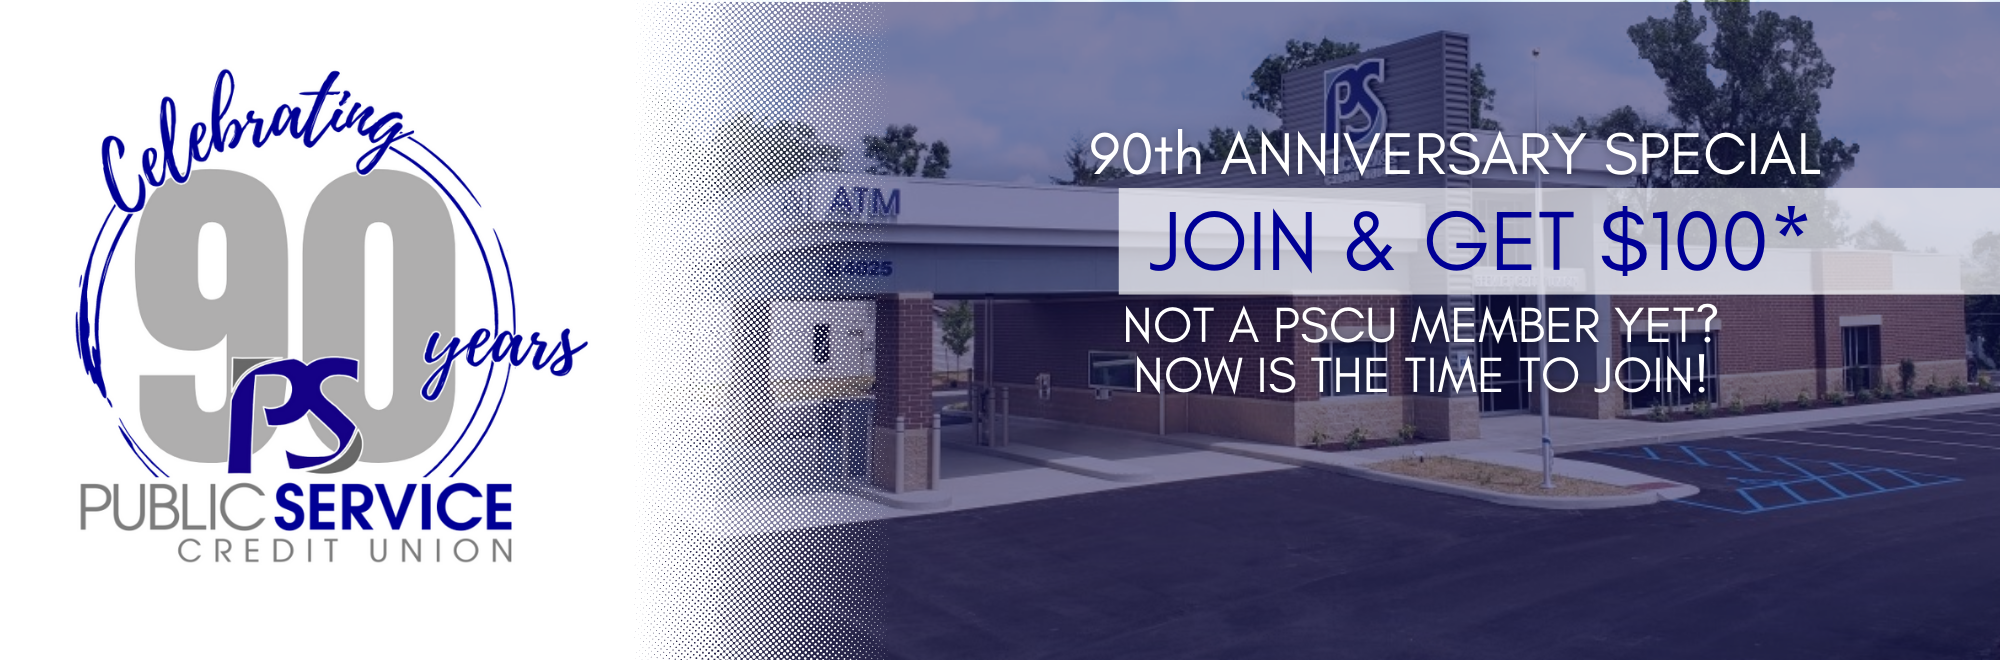 90th Anniversary Special Join & Get $100* Not a PSCU member yet? Now is the time to join!